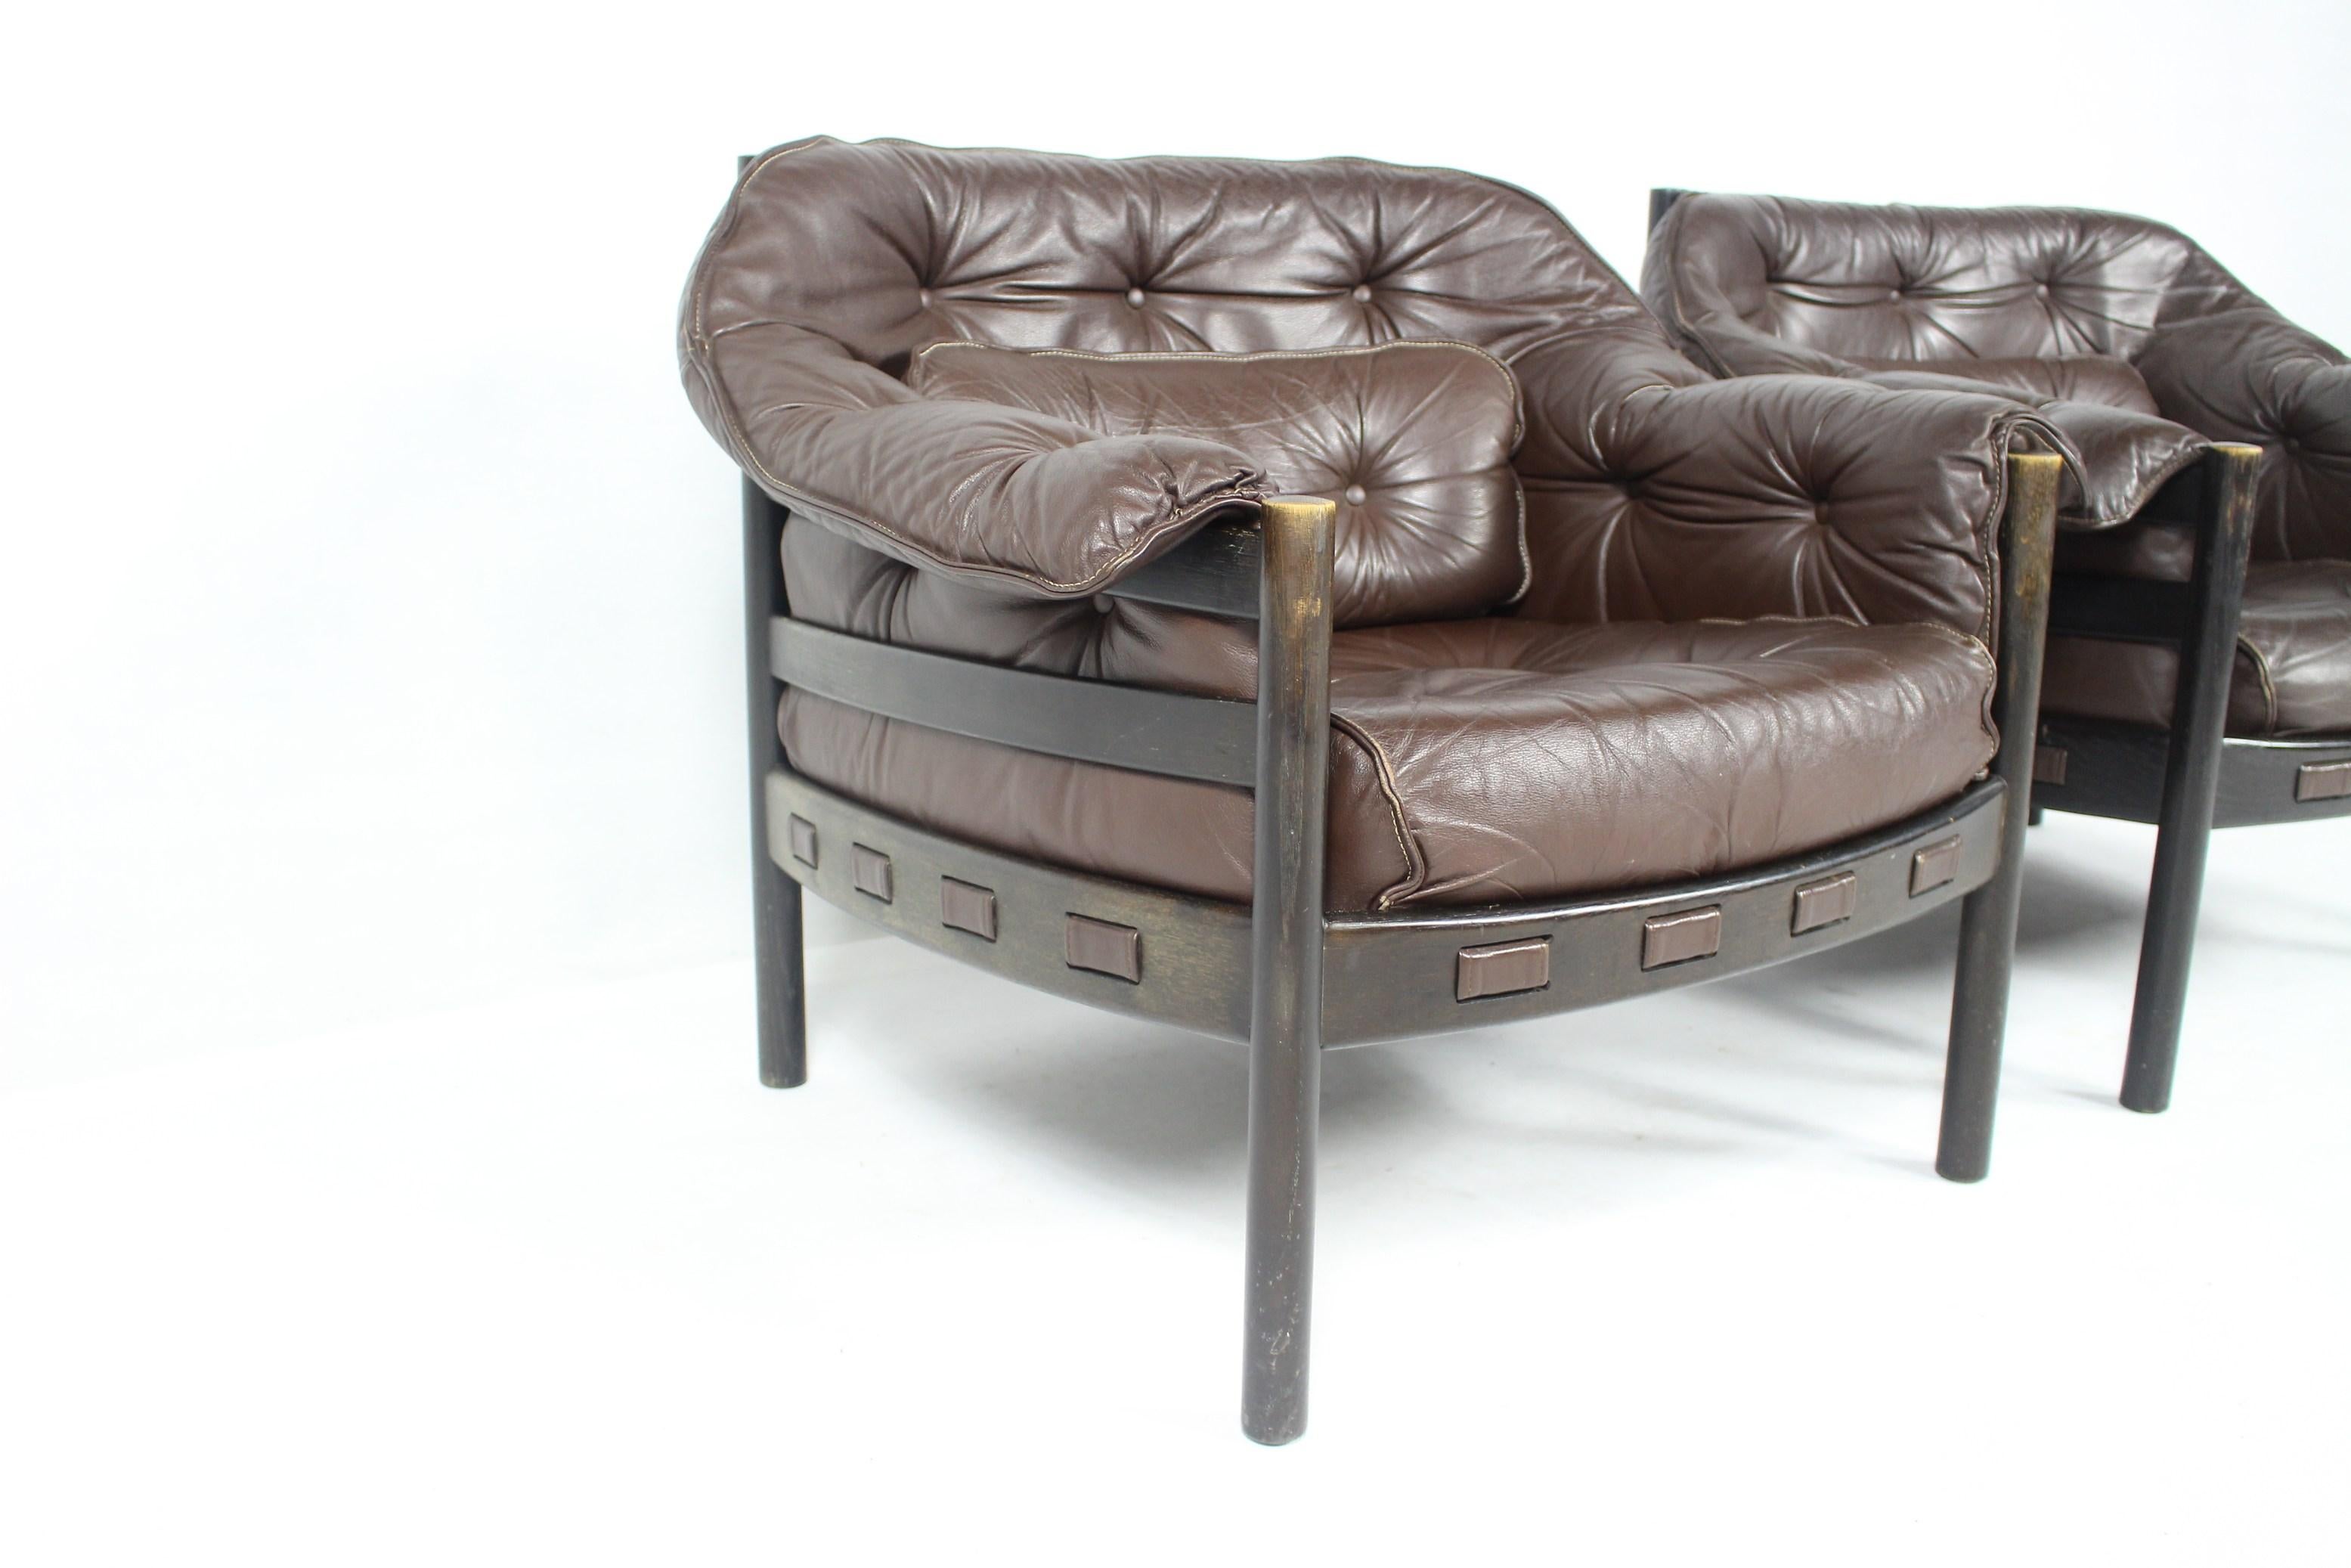 Swedish 1960s Sven Ellekaer Brown Leather Chairs For Coja  For Sale